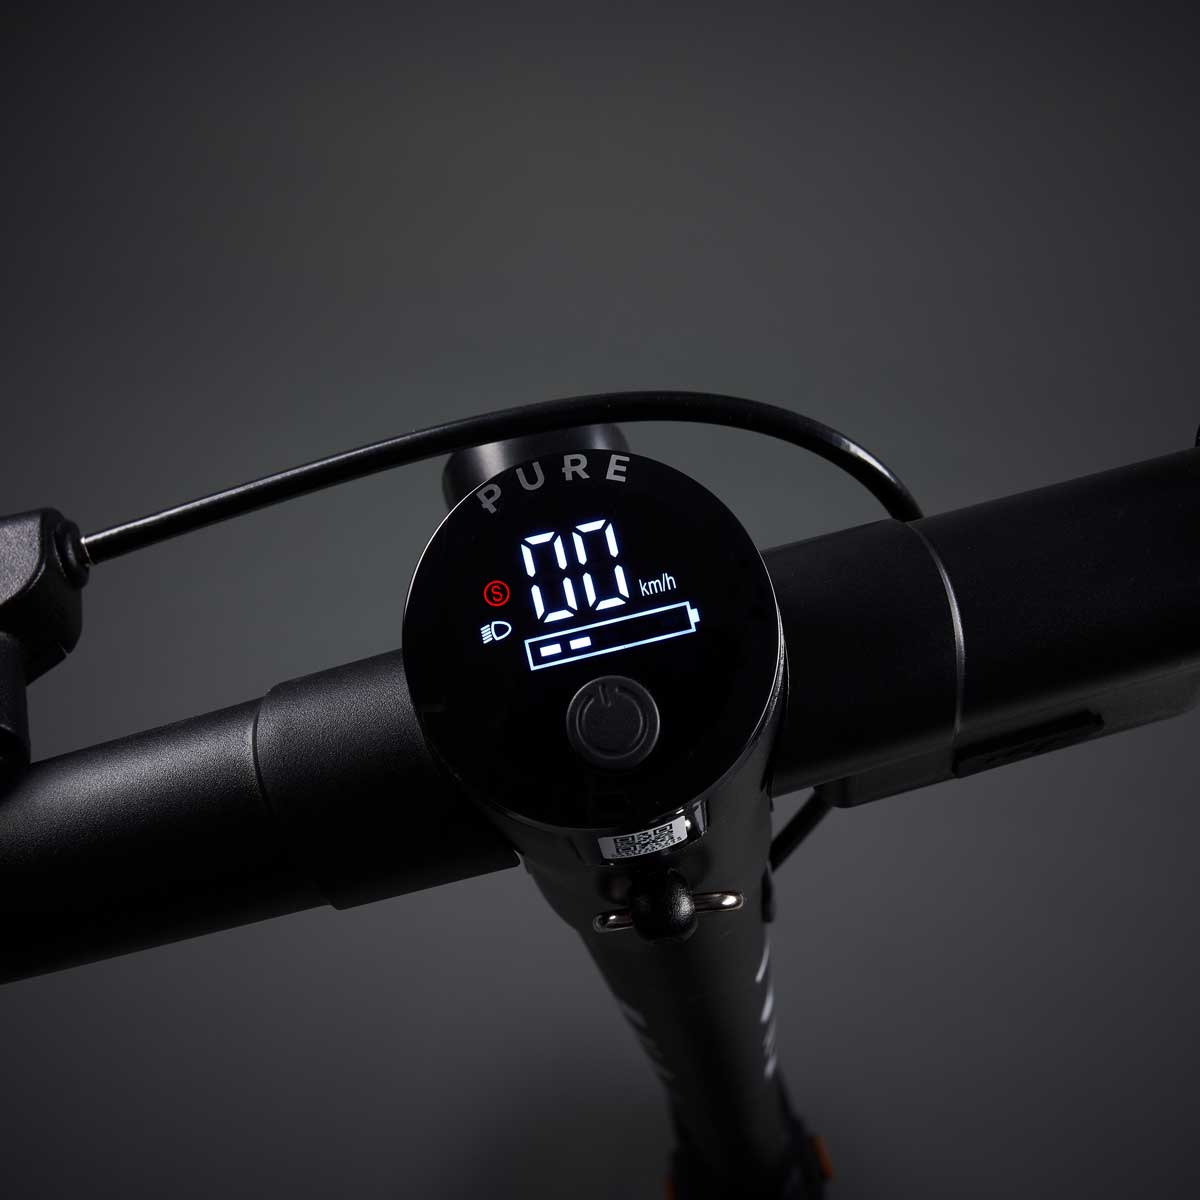 Pure Air Gen 2 Black LED Display in the middle of the Handlebars